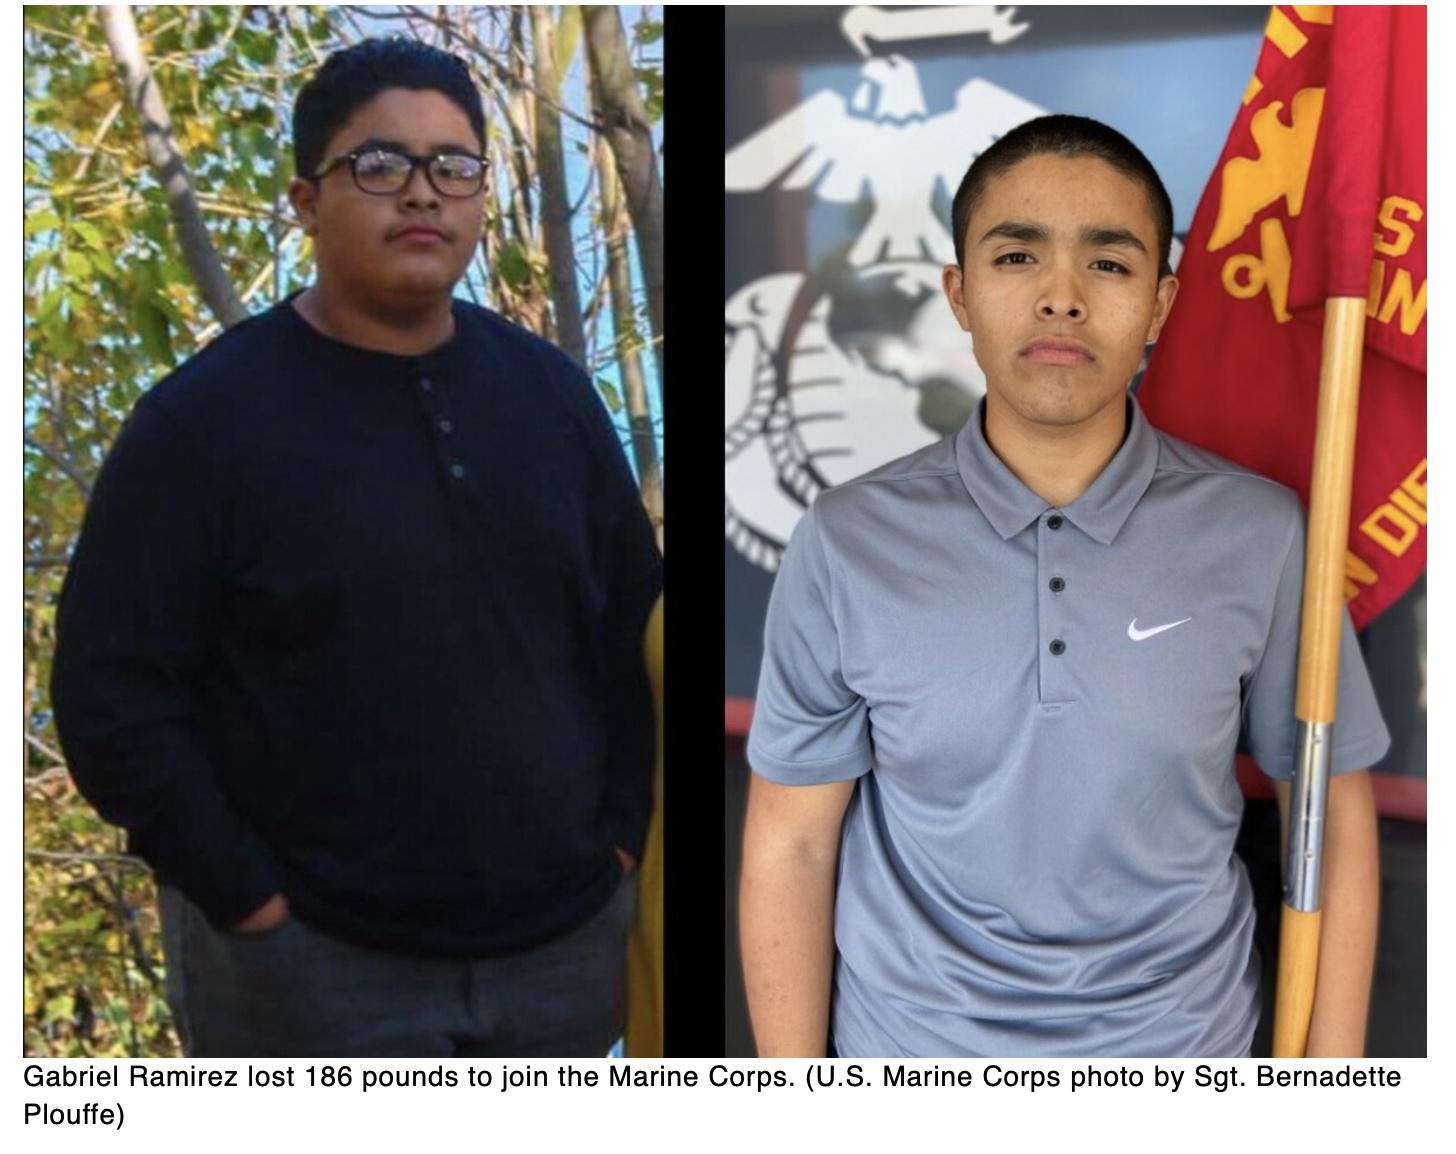  This teen lost nearly 200 pounds to join the Marine Corps